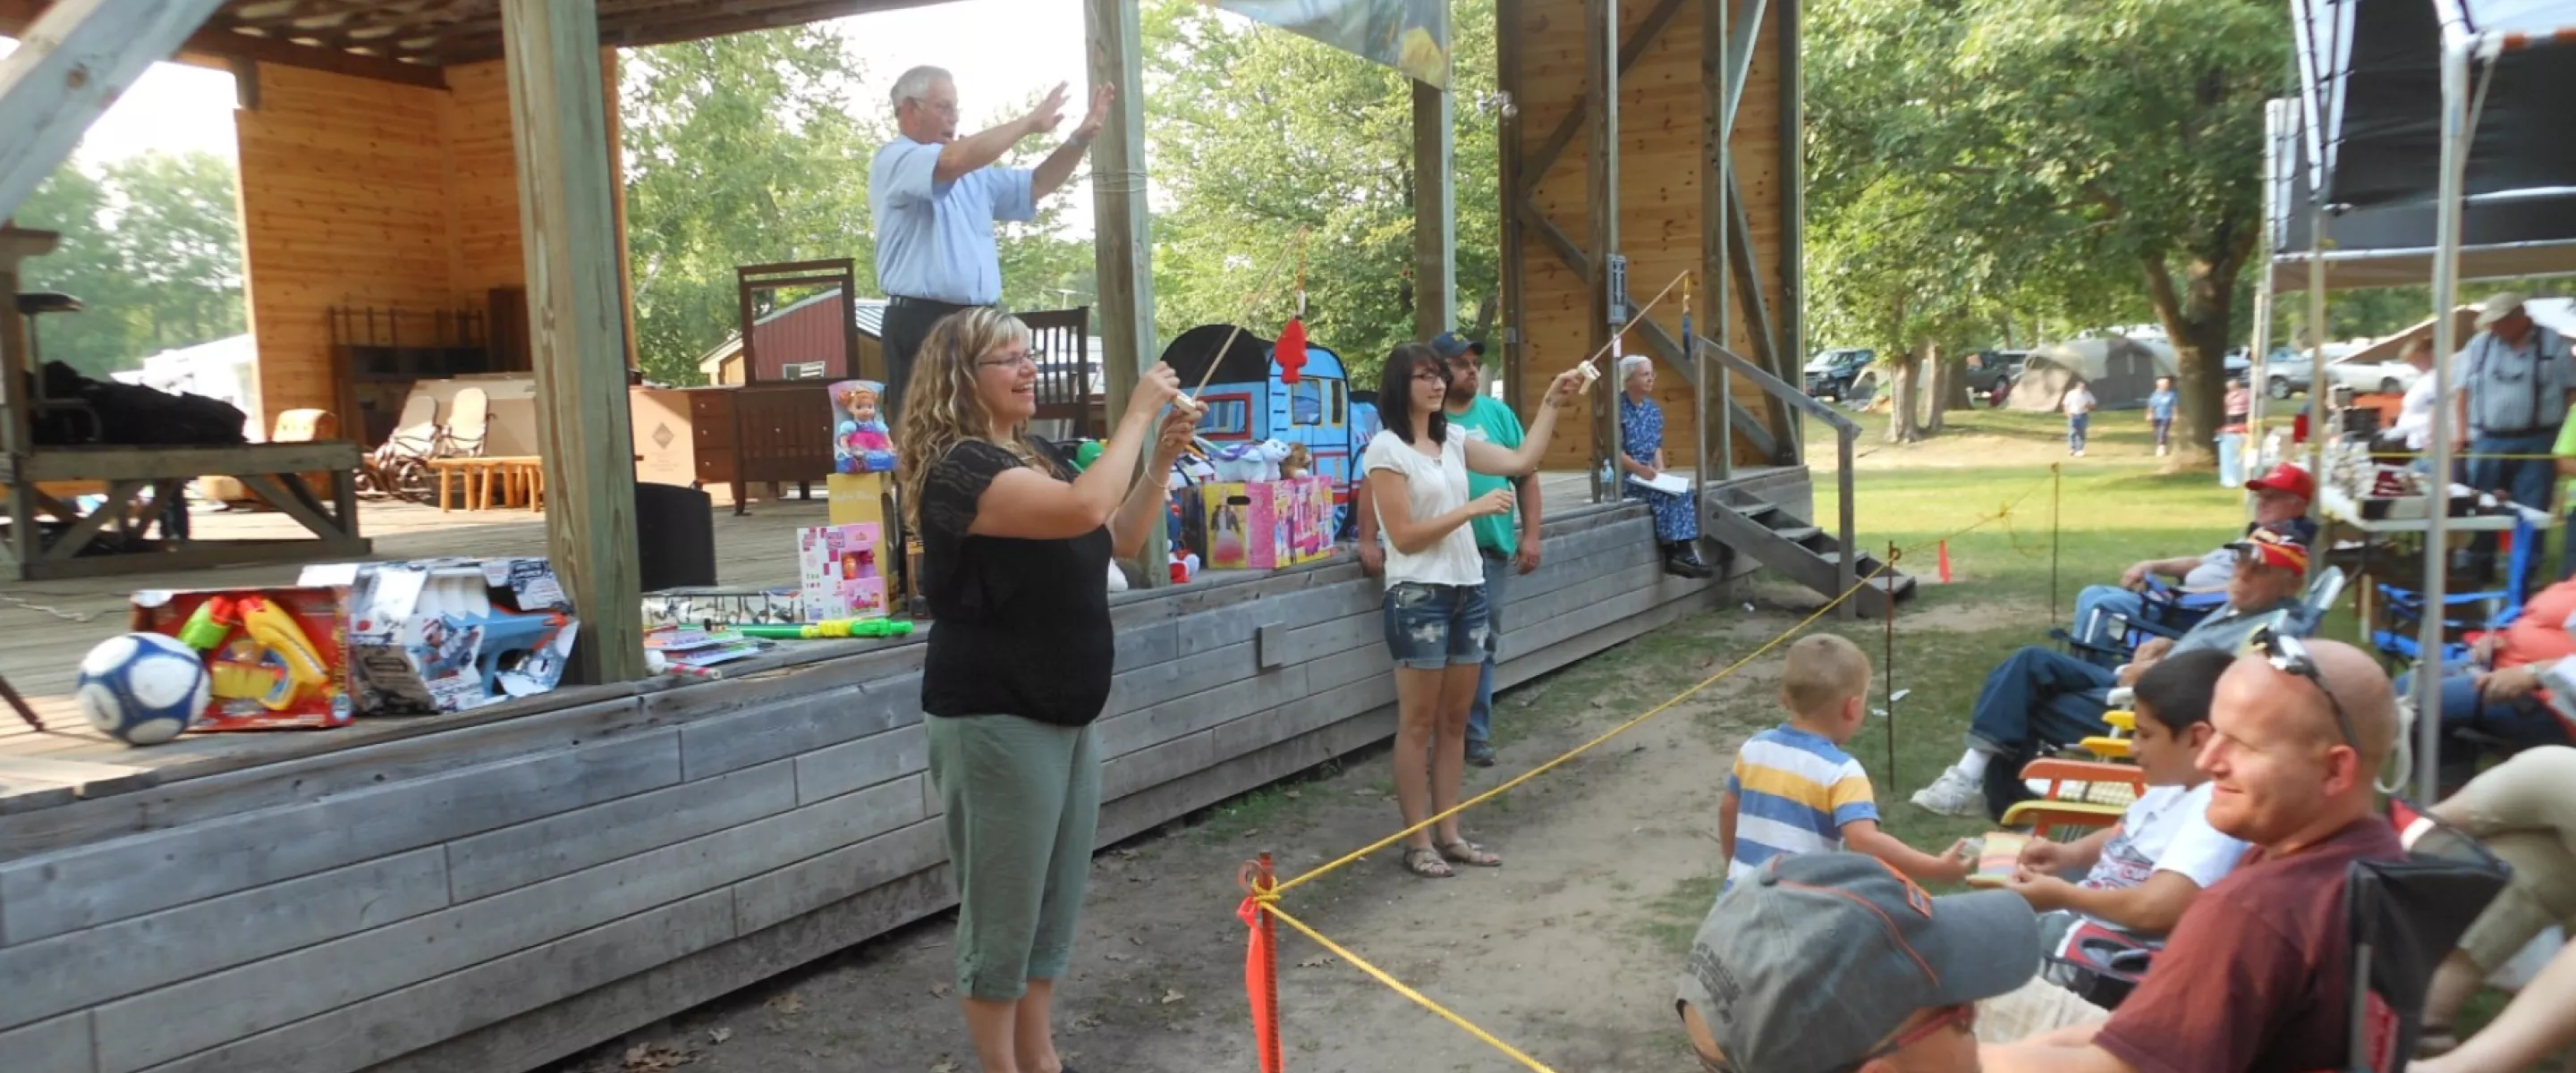 An auctioneer stands on an outdoor stage. Two women are down below displaying toys that are for auction.